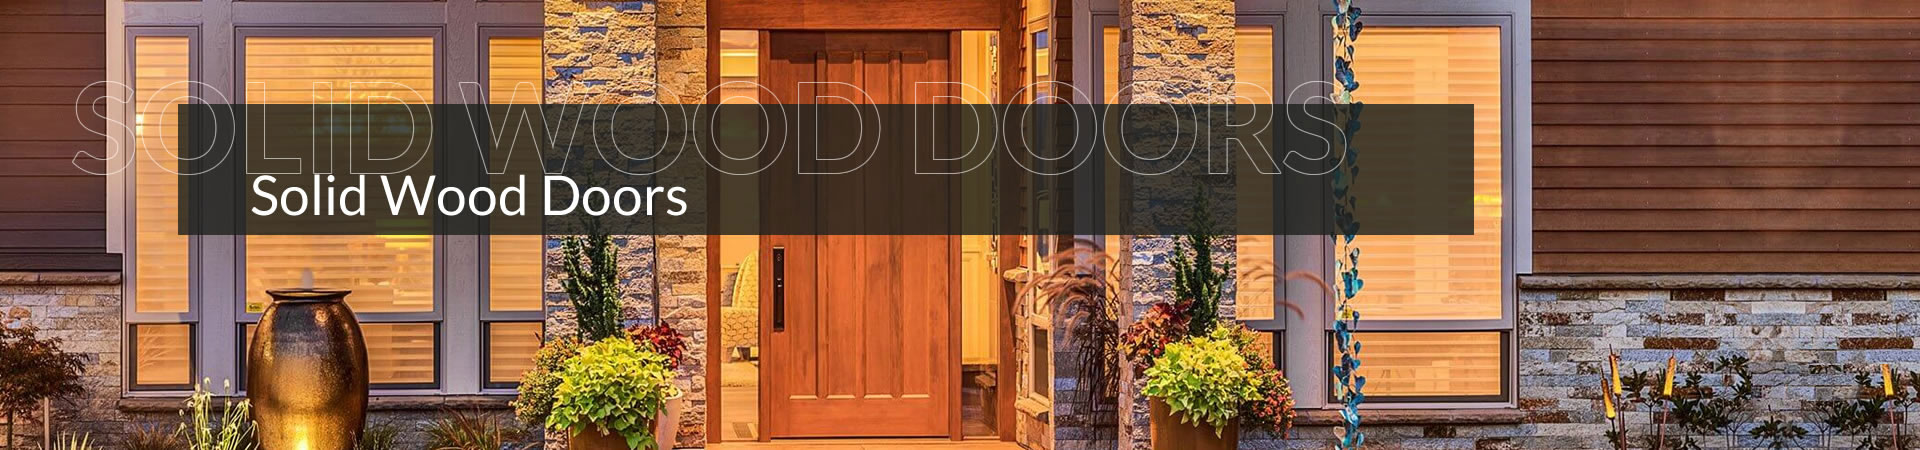 Rustic, Entry Doors from Turkstra - Visit our showroom in Stoney Creek today for information about our windows and doors, Quality installation with professional estimates.